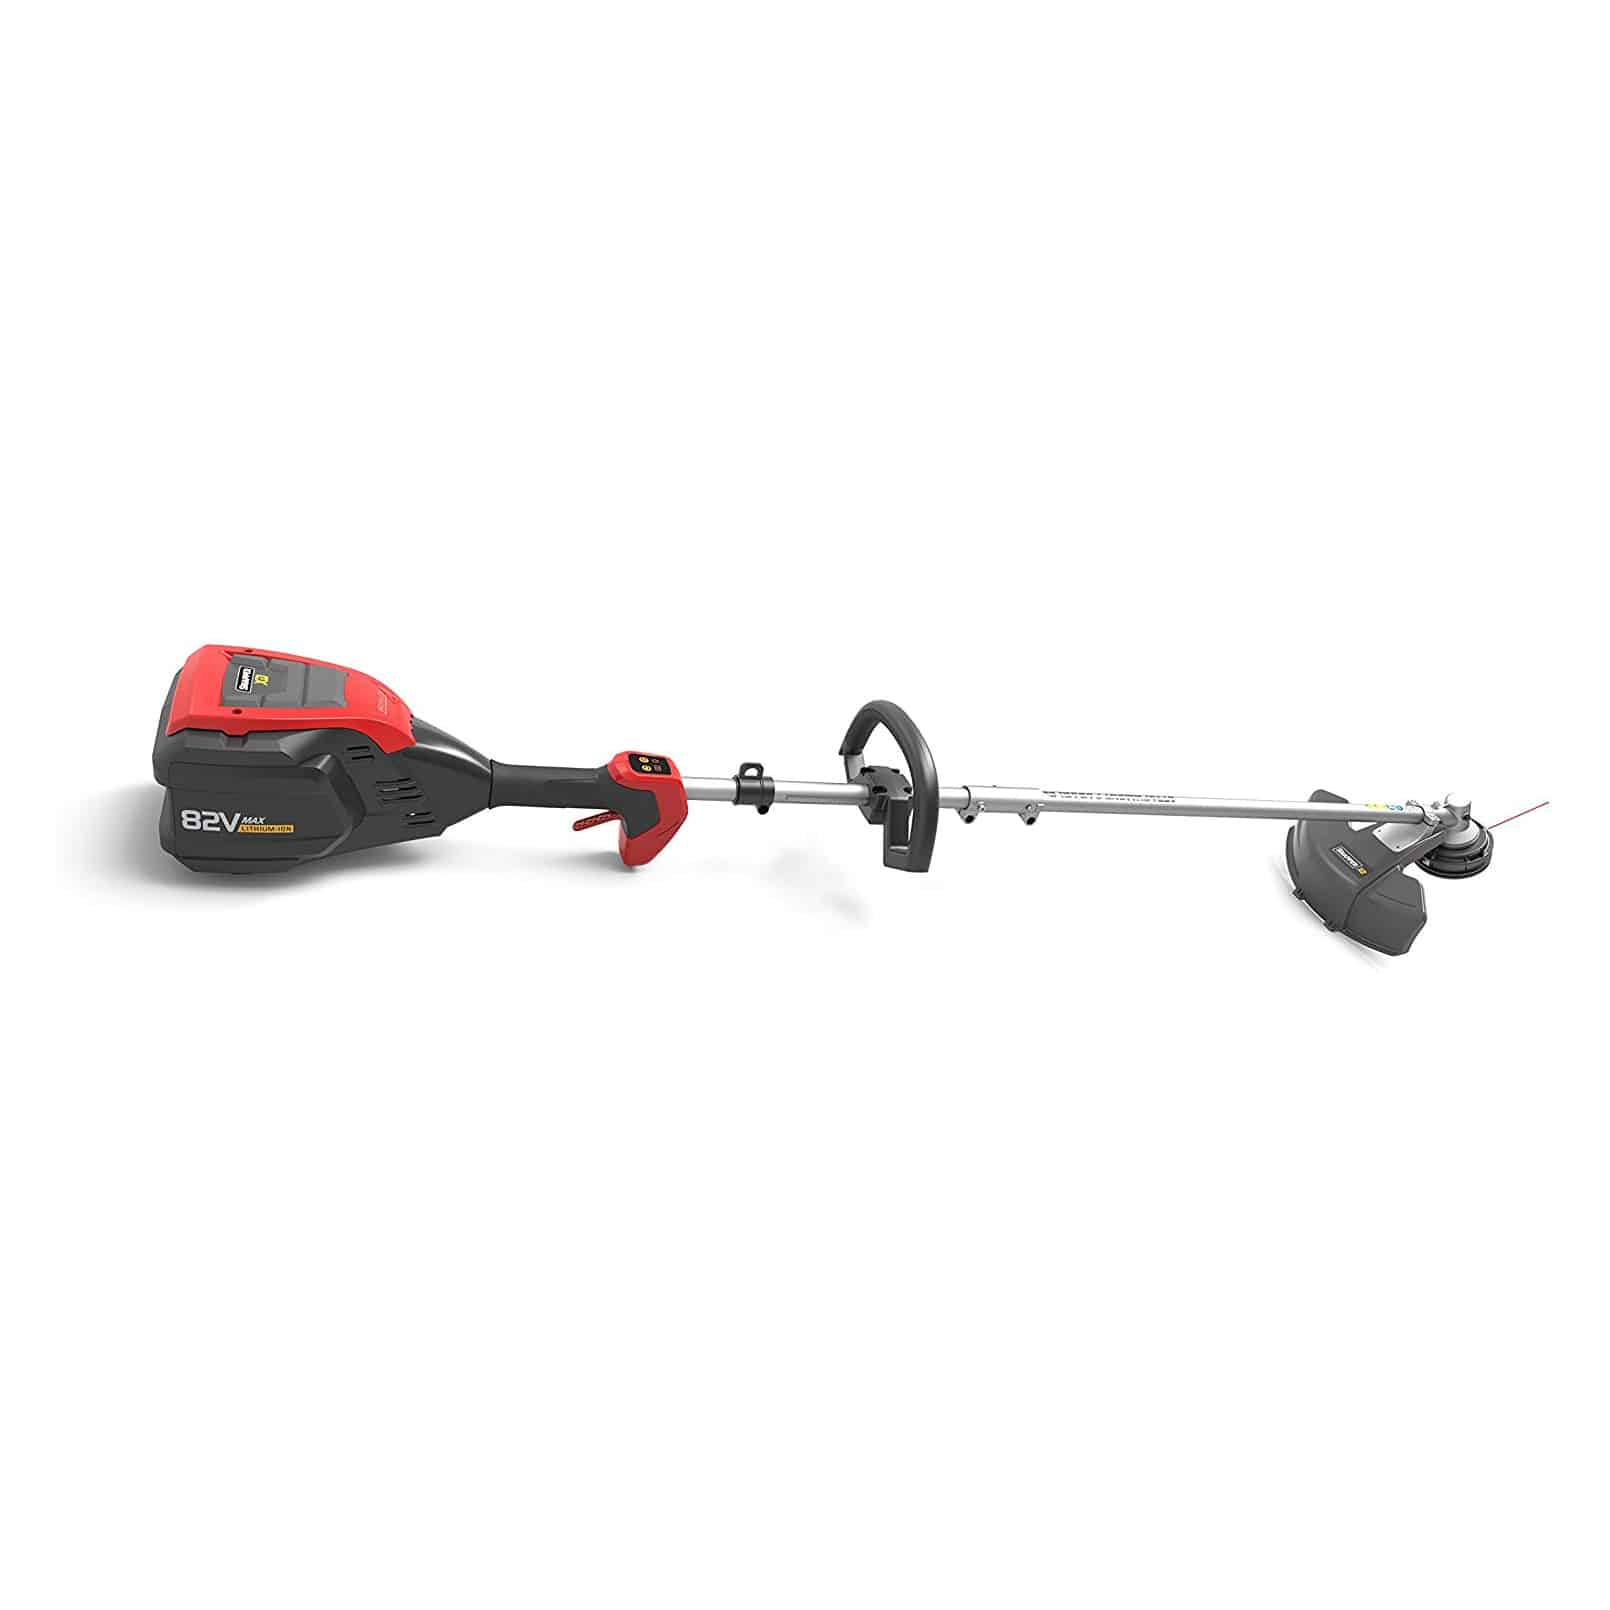 Top 10 Best Electric String Trimmers in 2021 Reviews Guide